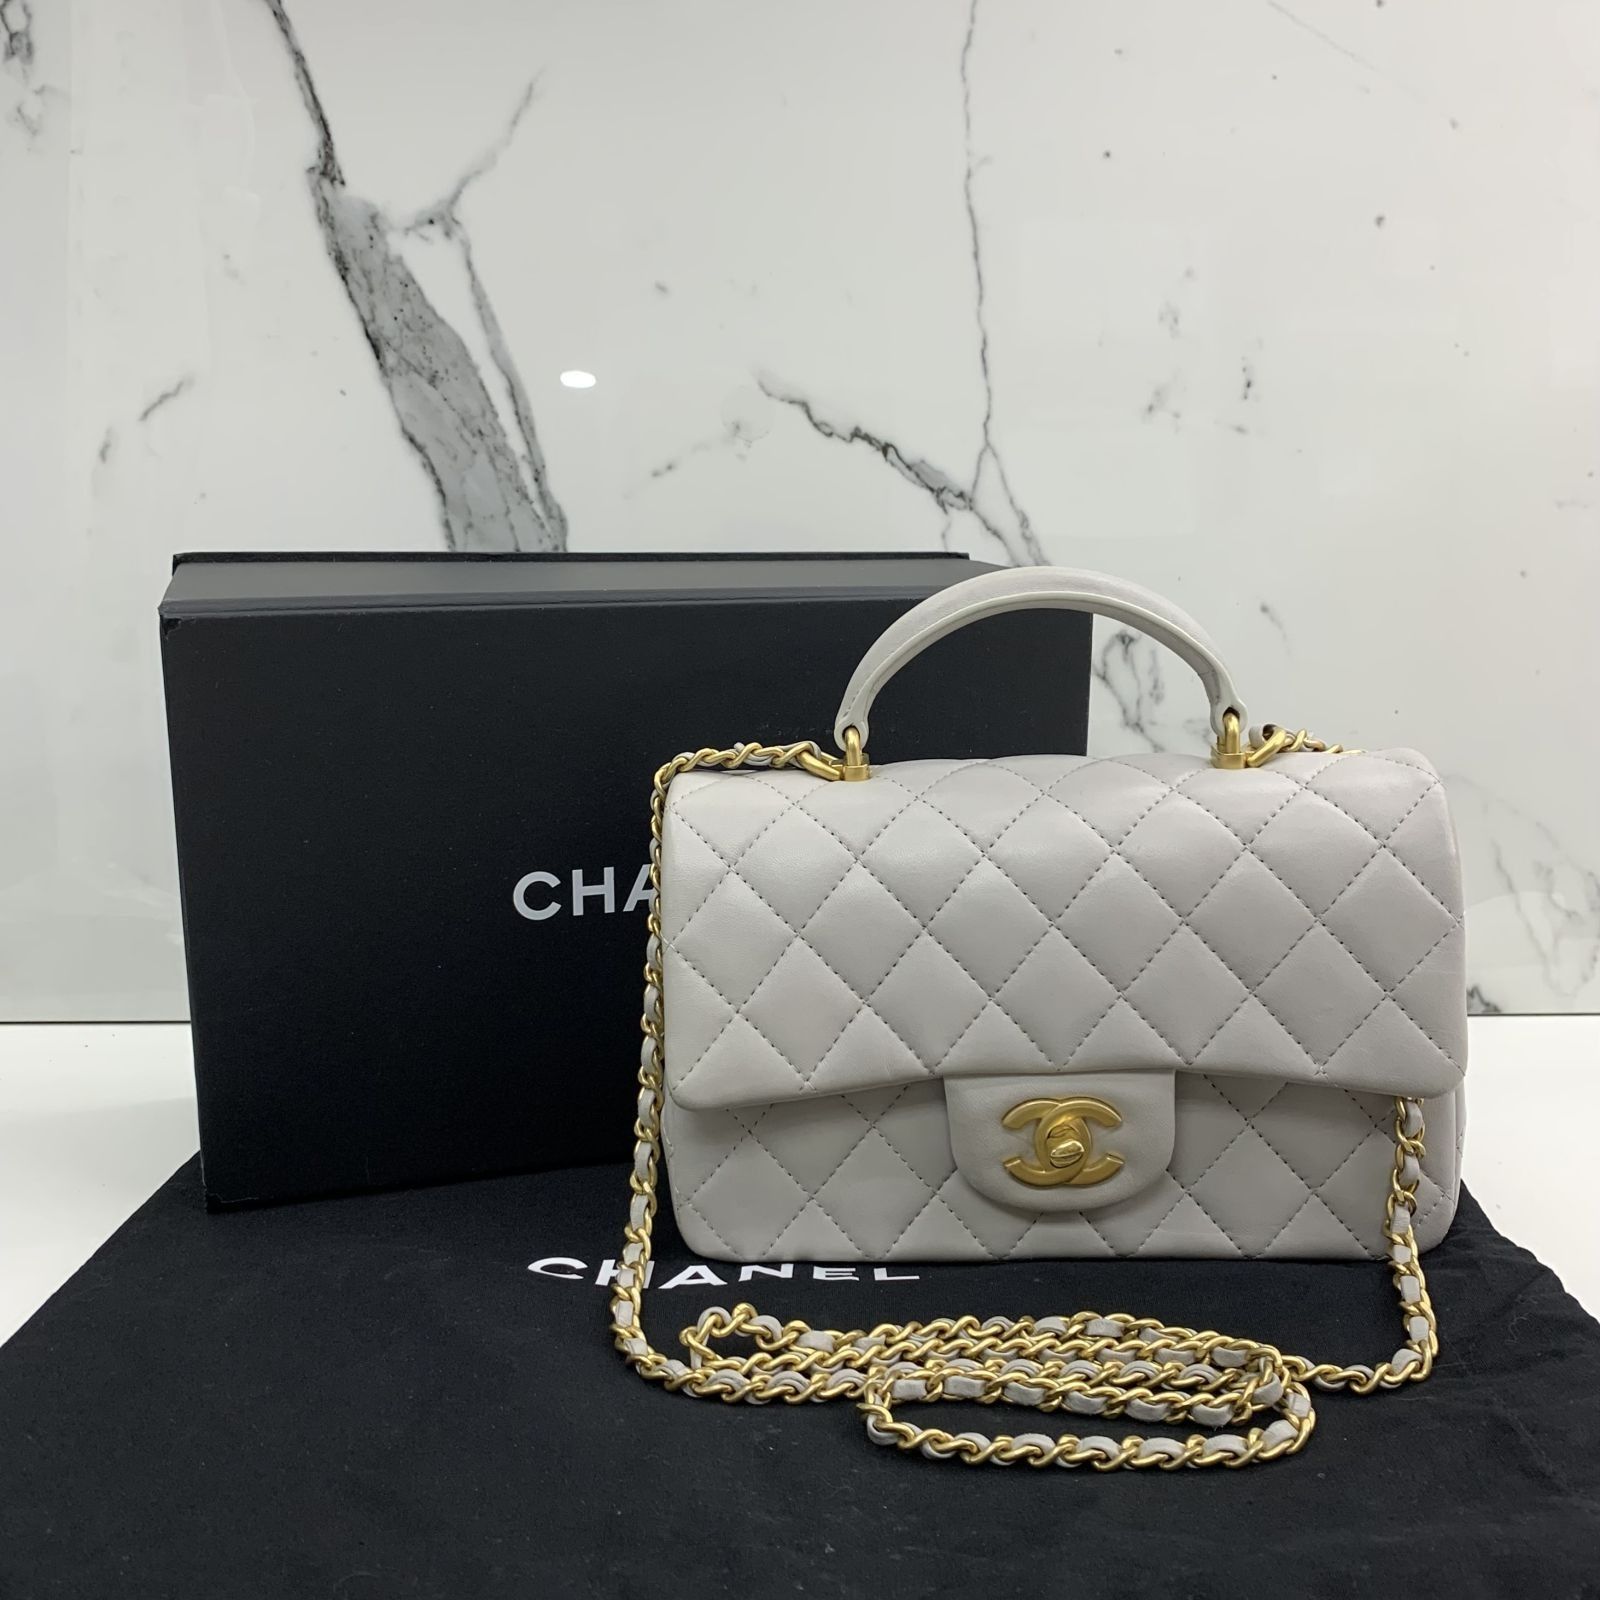 CHANEL Pink Bags & Handbags for Women, Authenticity Guaranteed